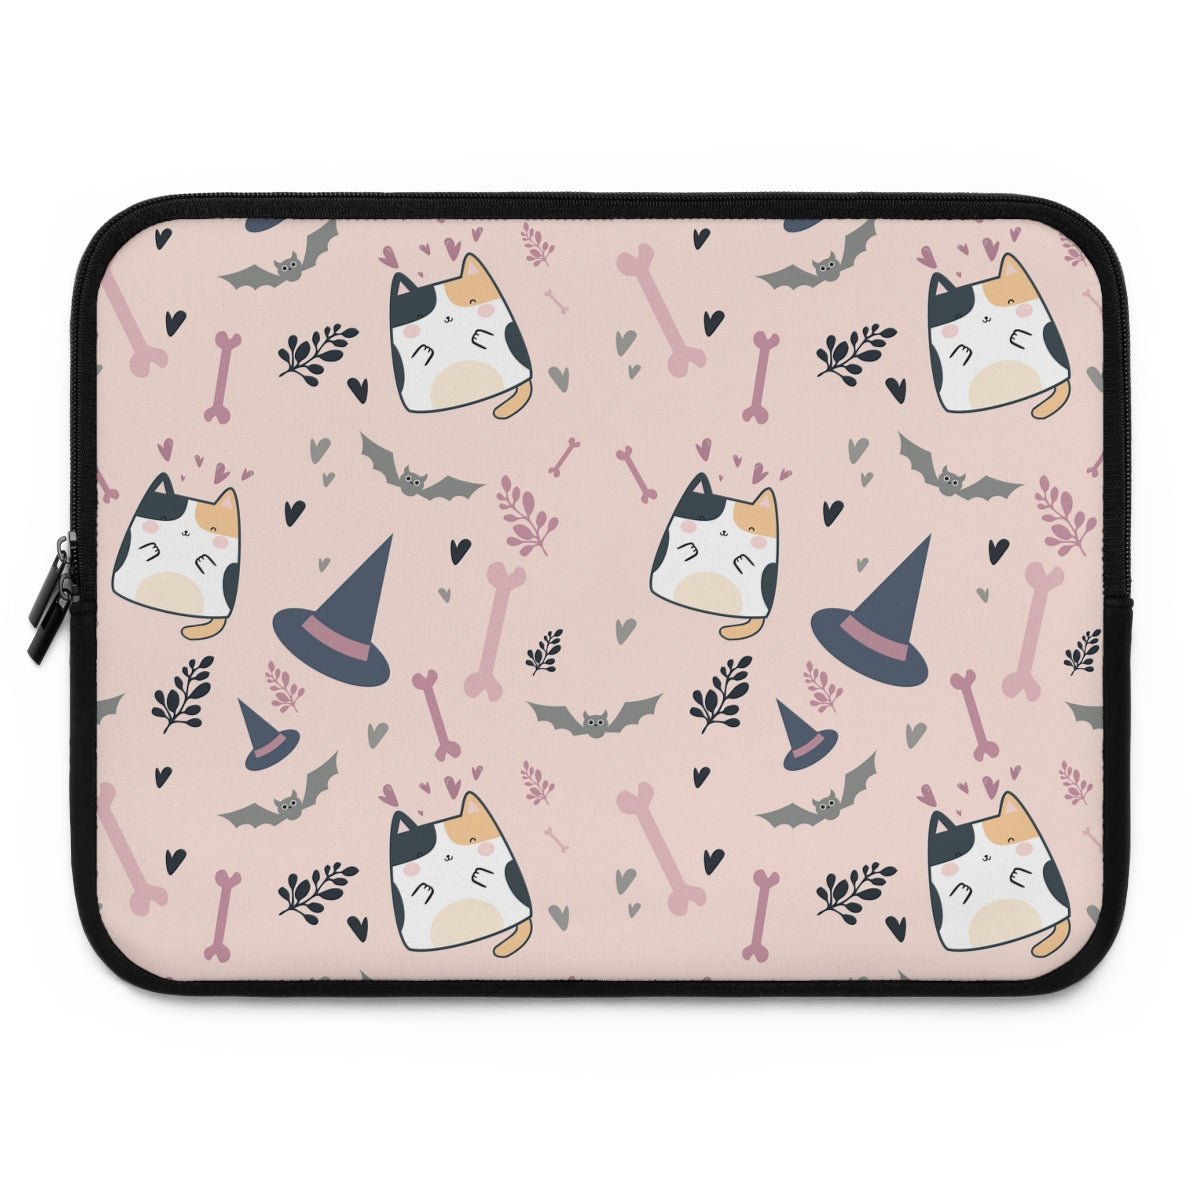 Halloween Cats and Bats Laptop Sleeve - Puffin Lime